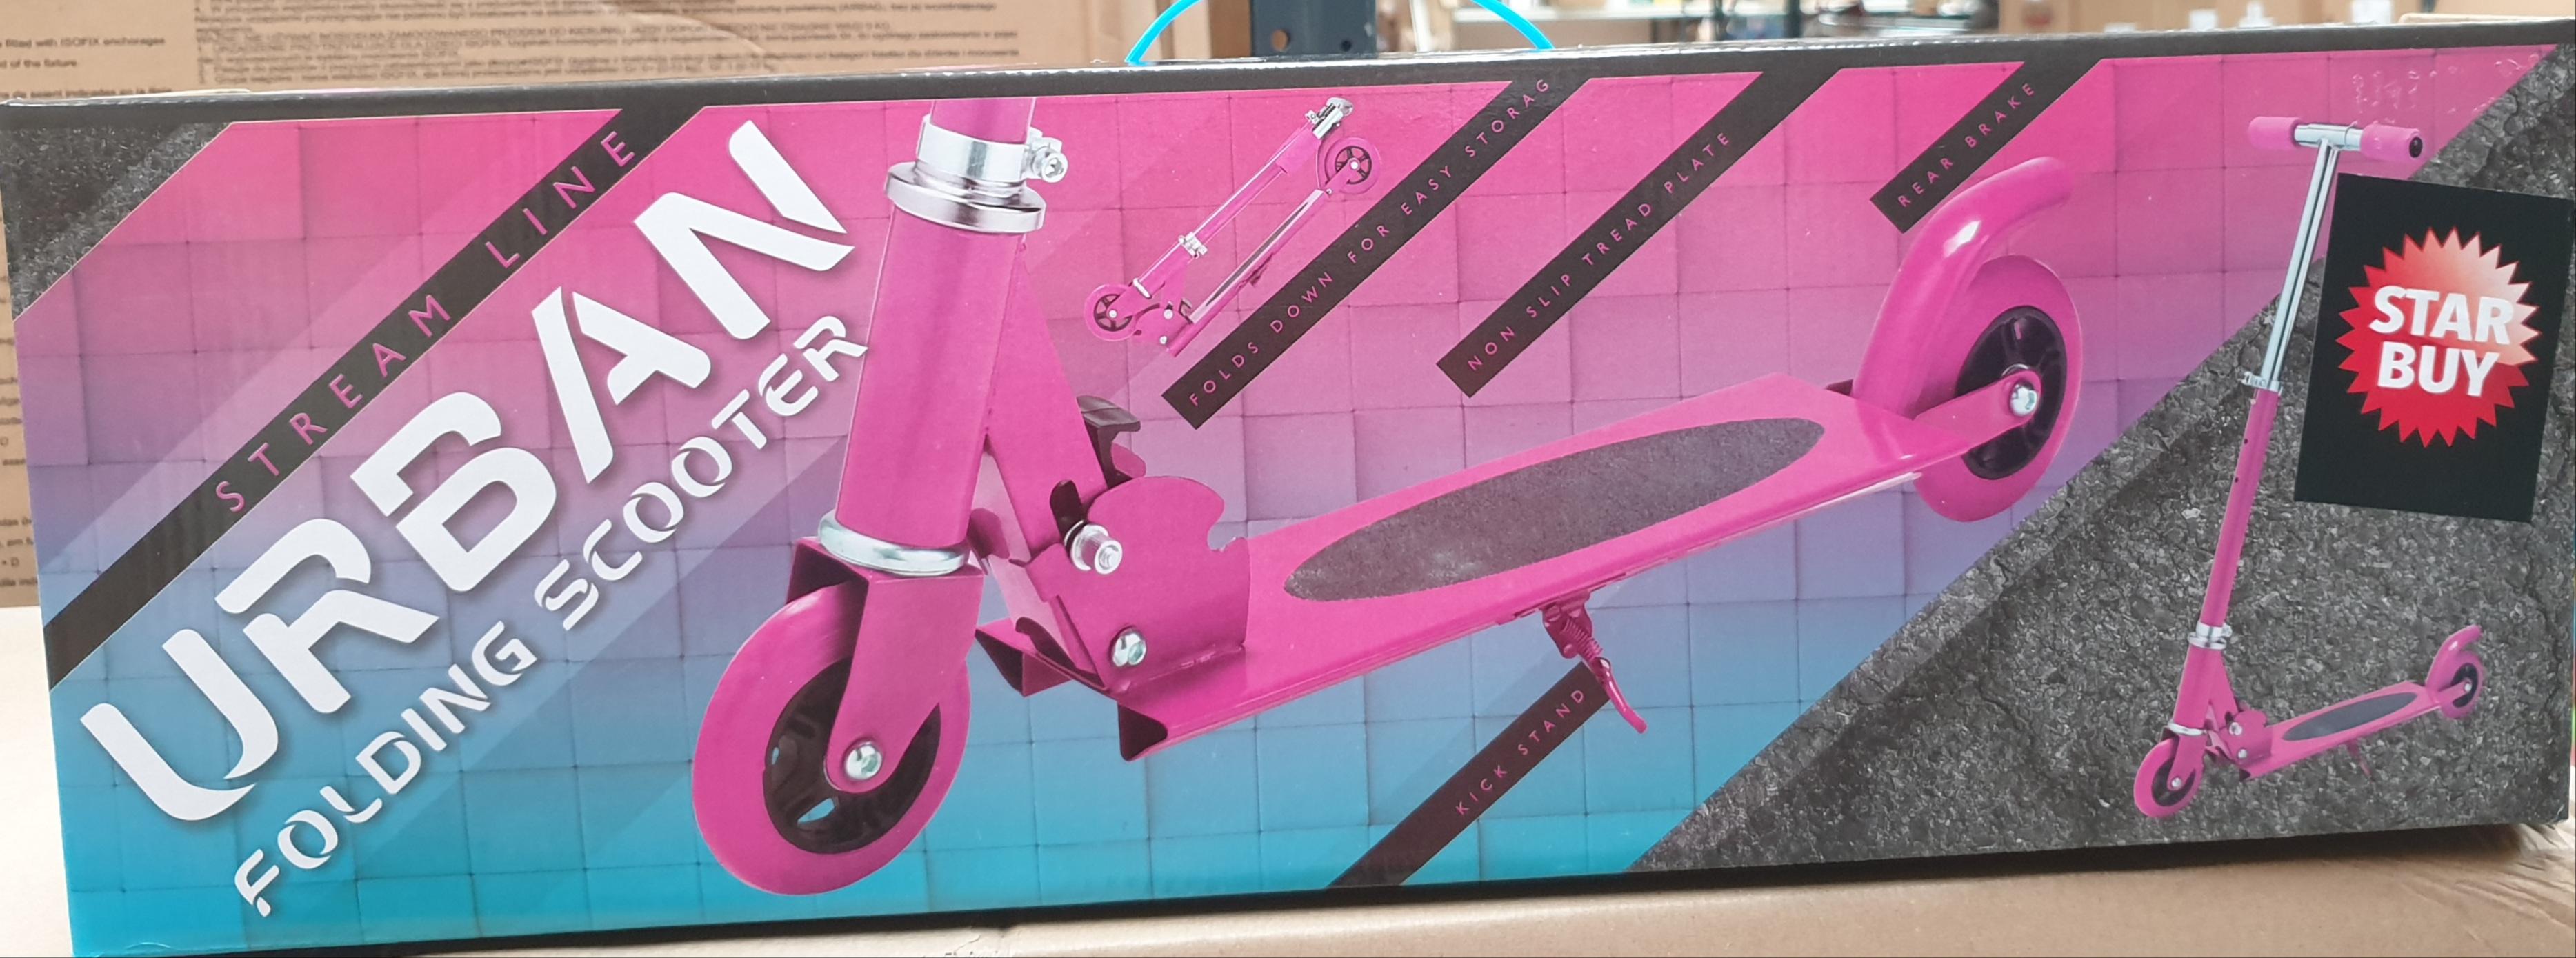 stream line folding scooter pink